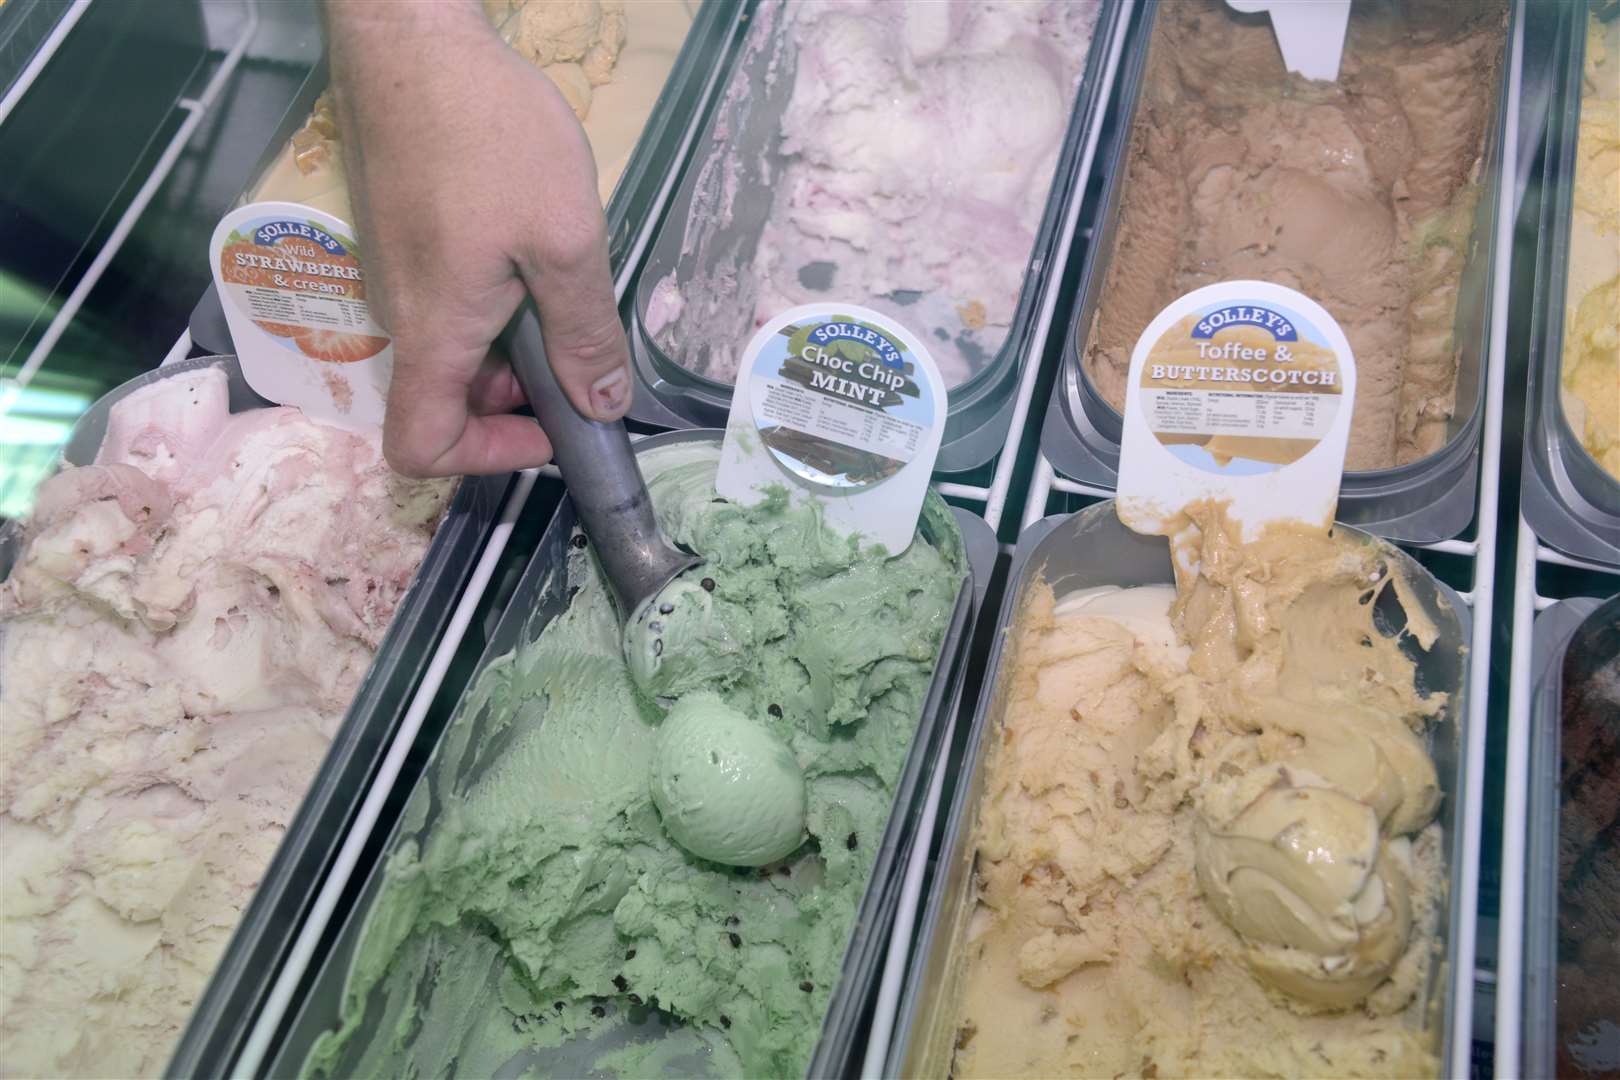 Solley's Ice Cream opened a farm shop next to its factory earlier this year